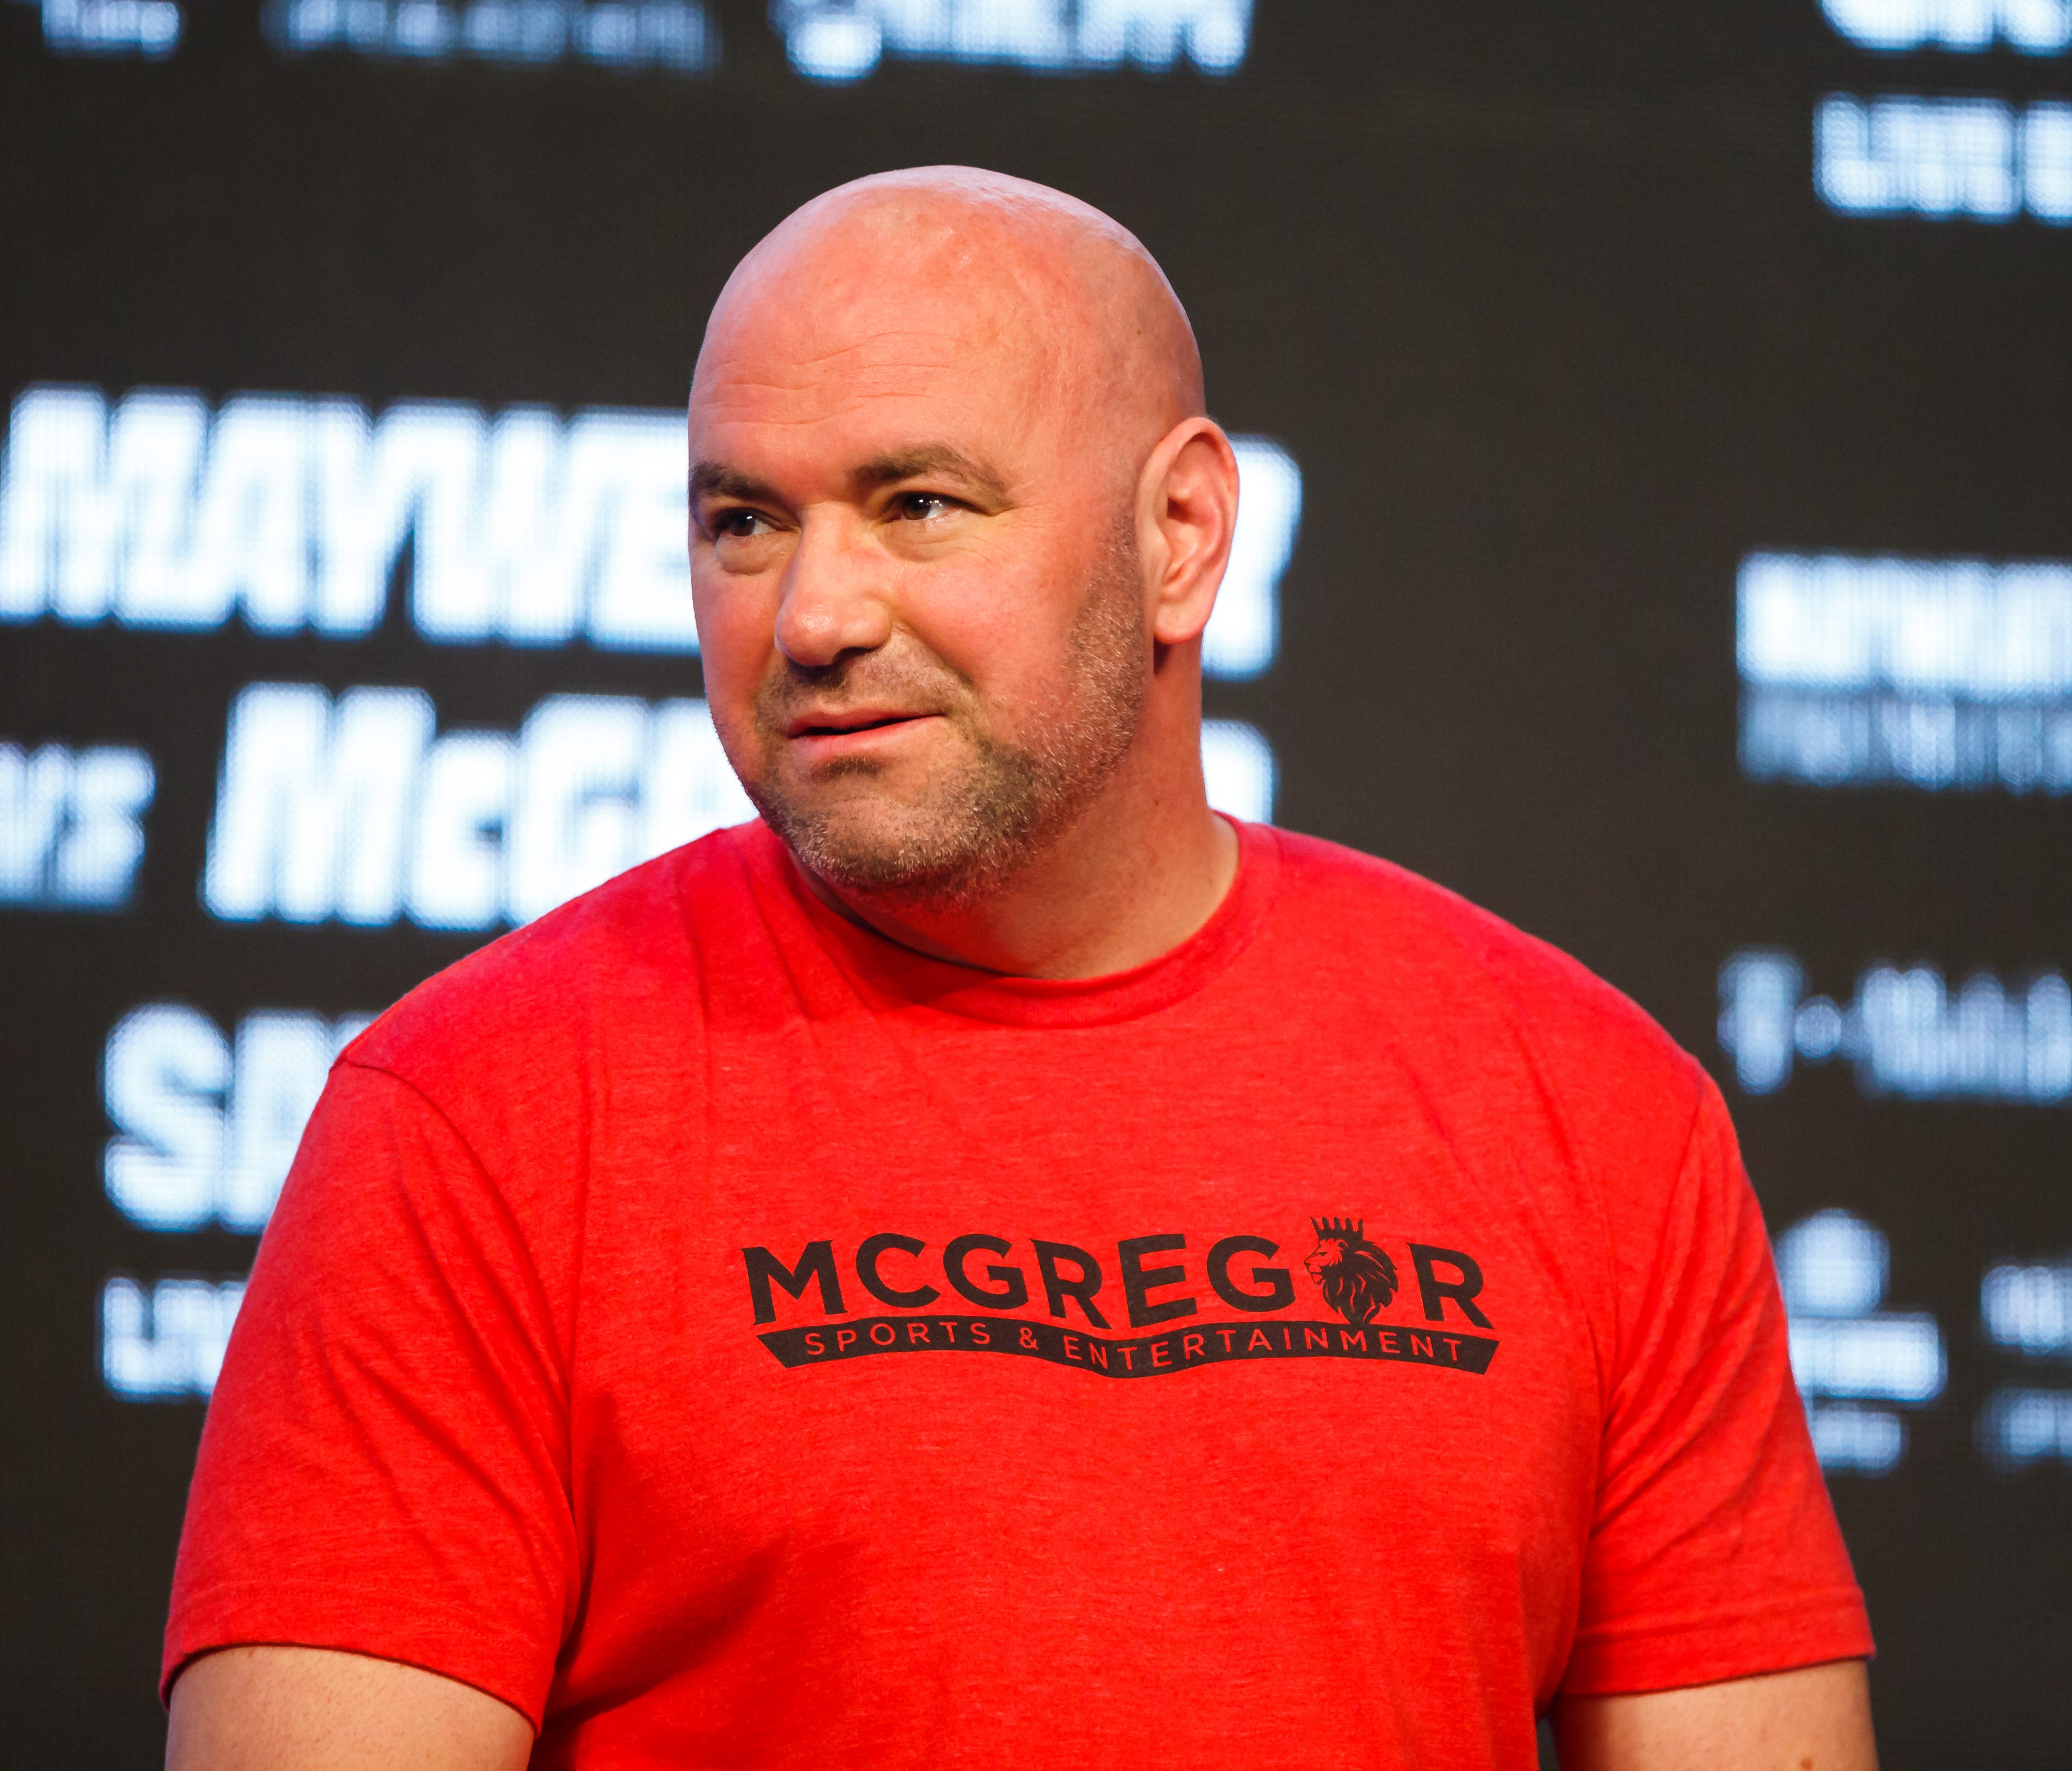 Dana White says the UFC has begun the process of handing out refunds for those unable to view the fight.